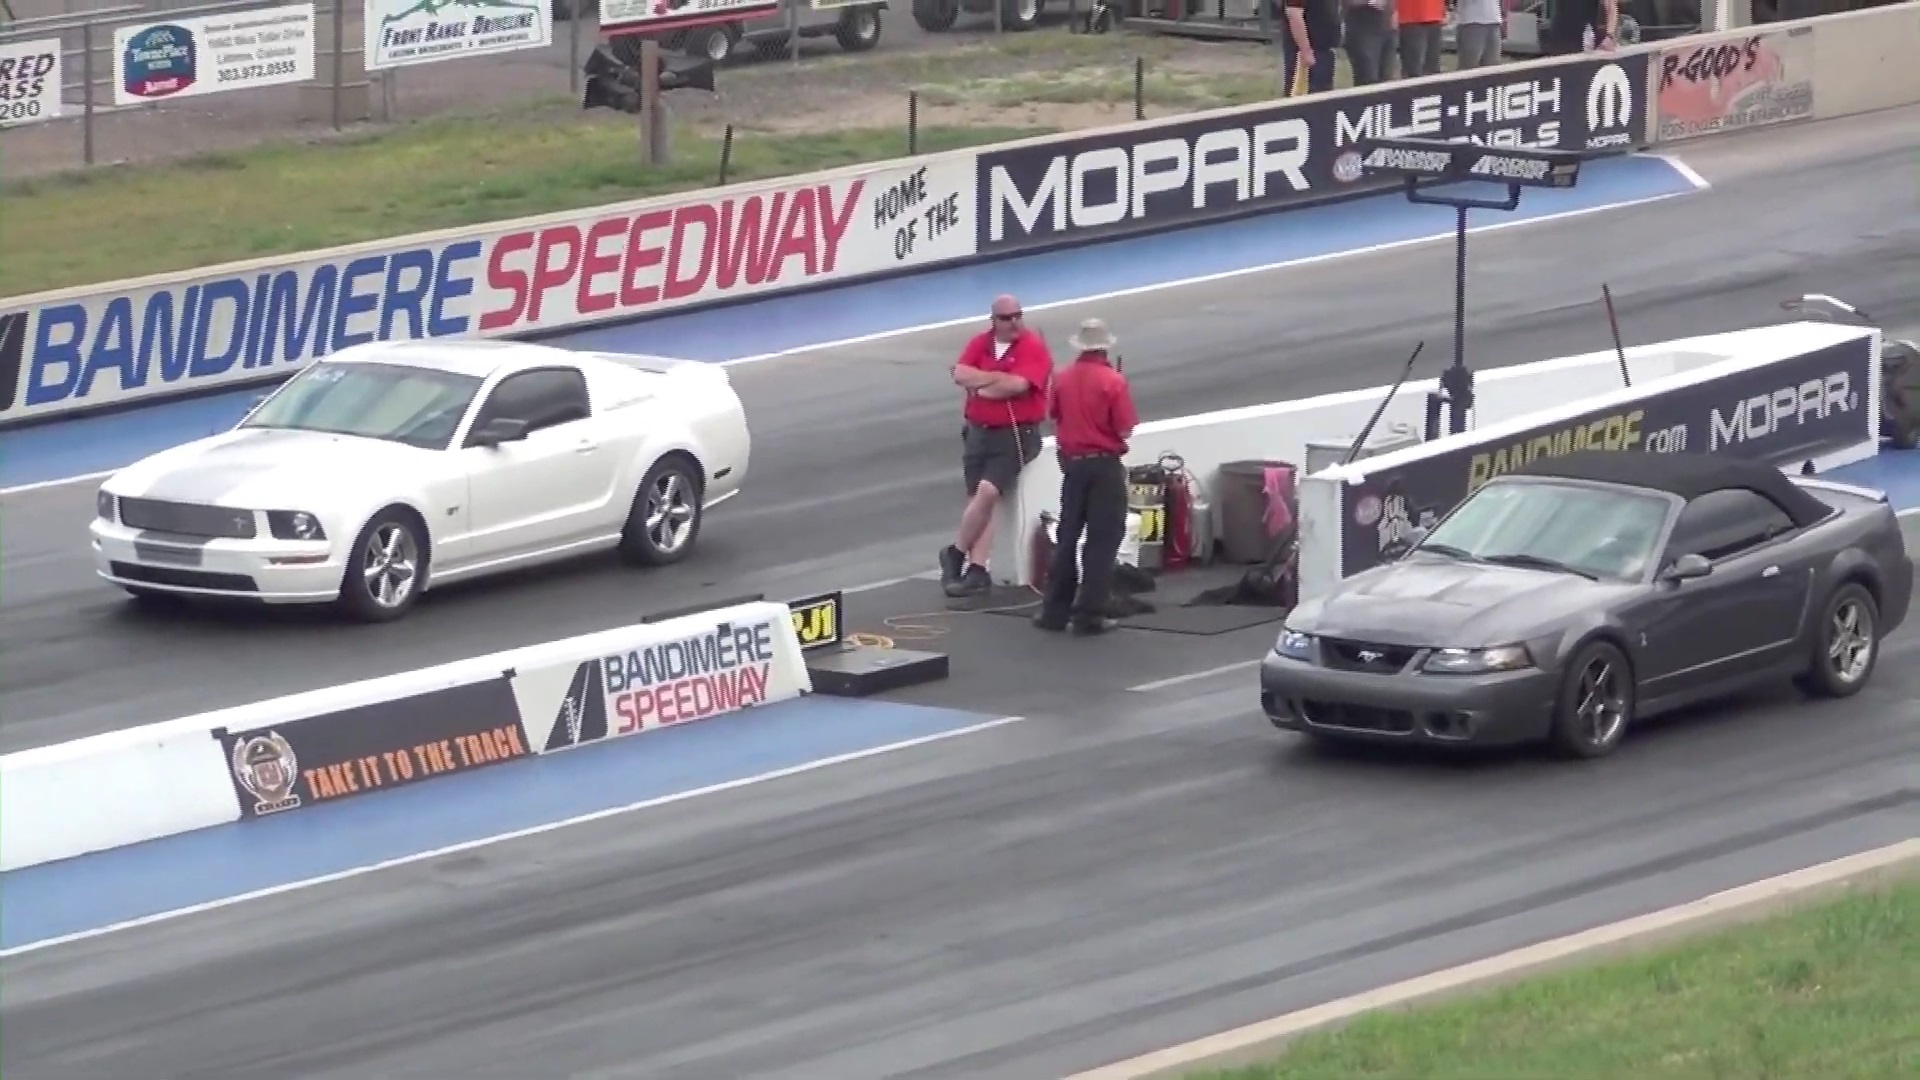 Video: 2001 Ford Mustang GT vs 2005 Ford Mustang GT Drag Race